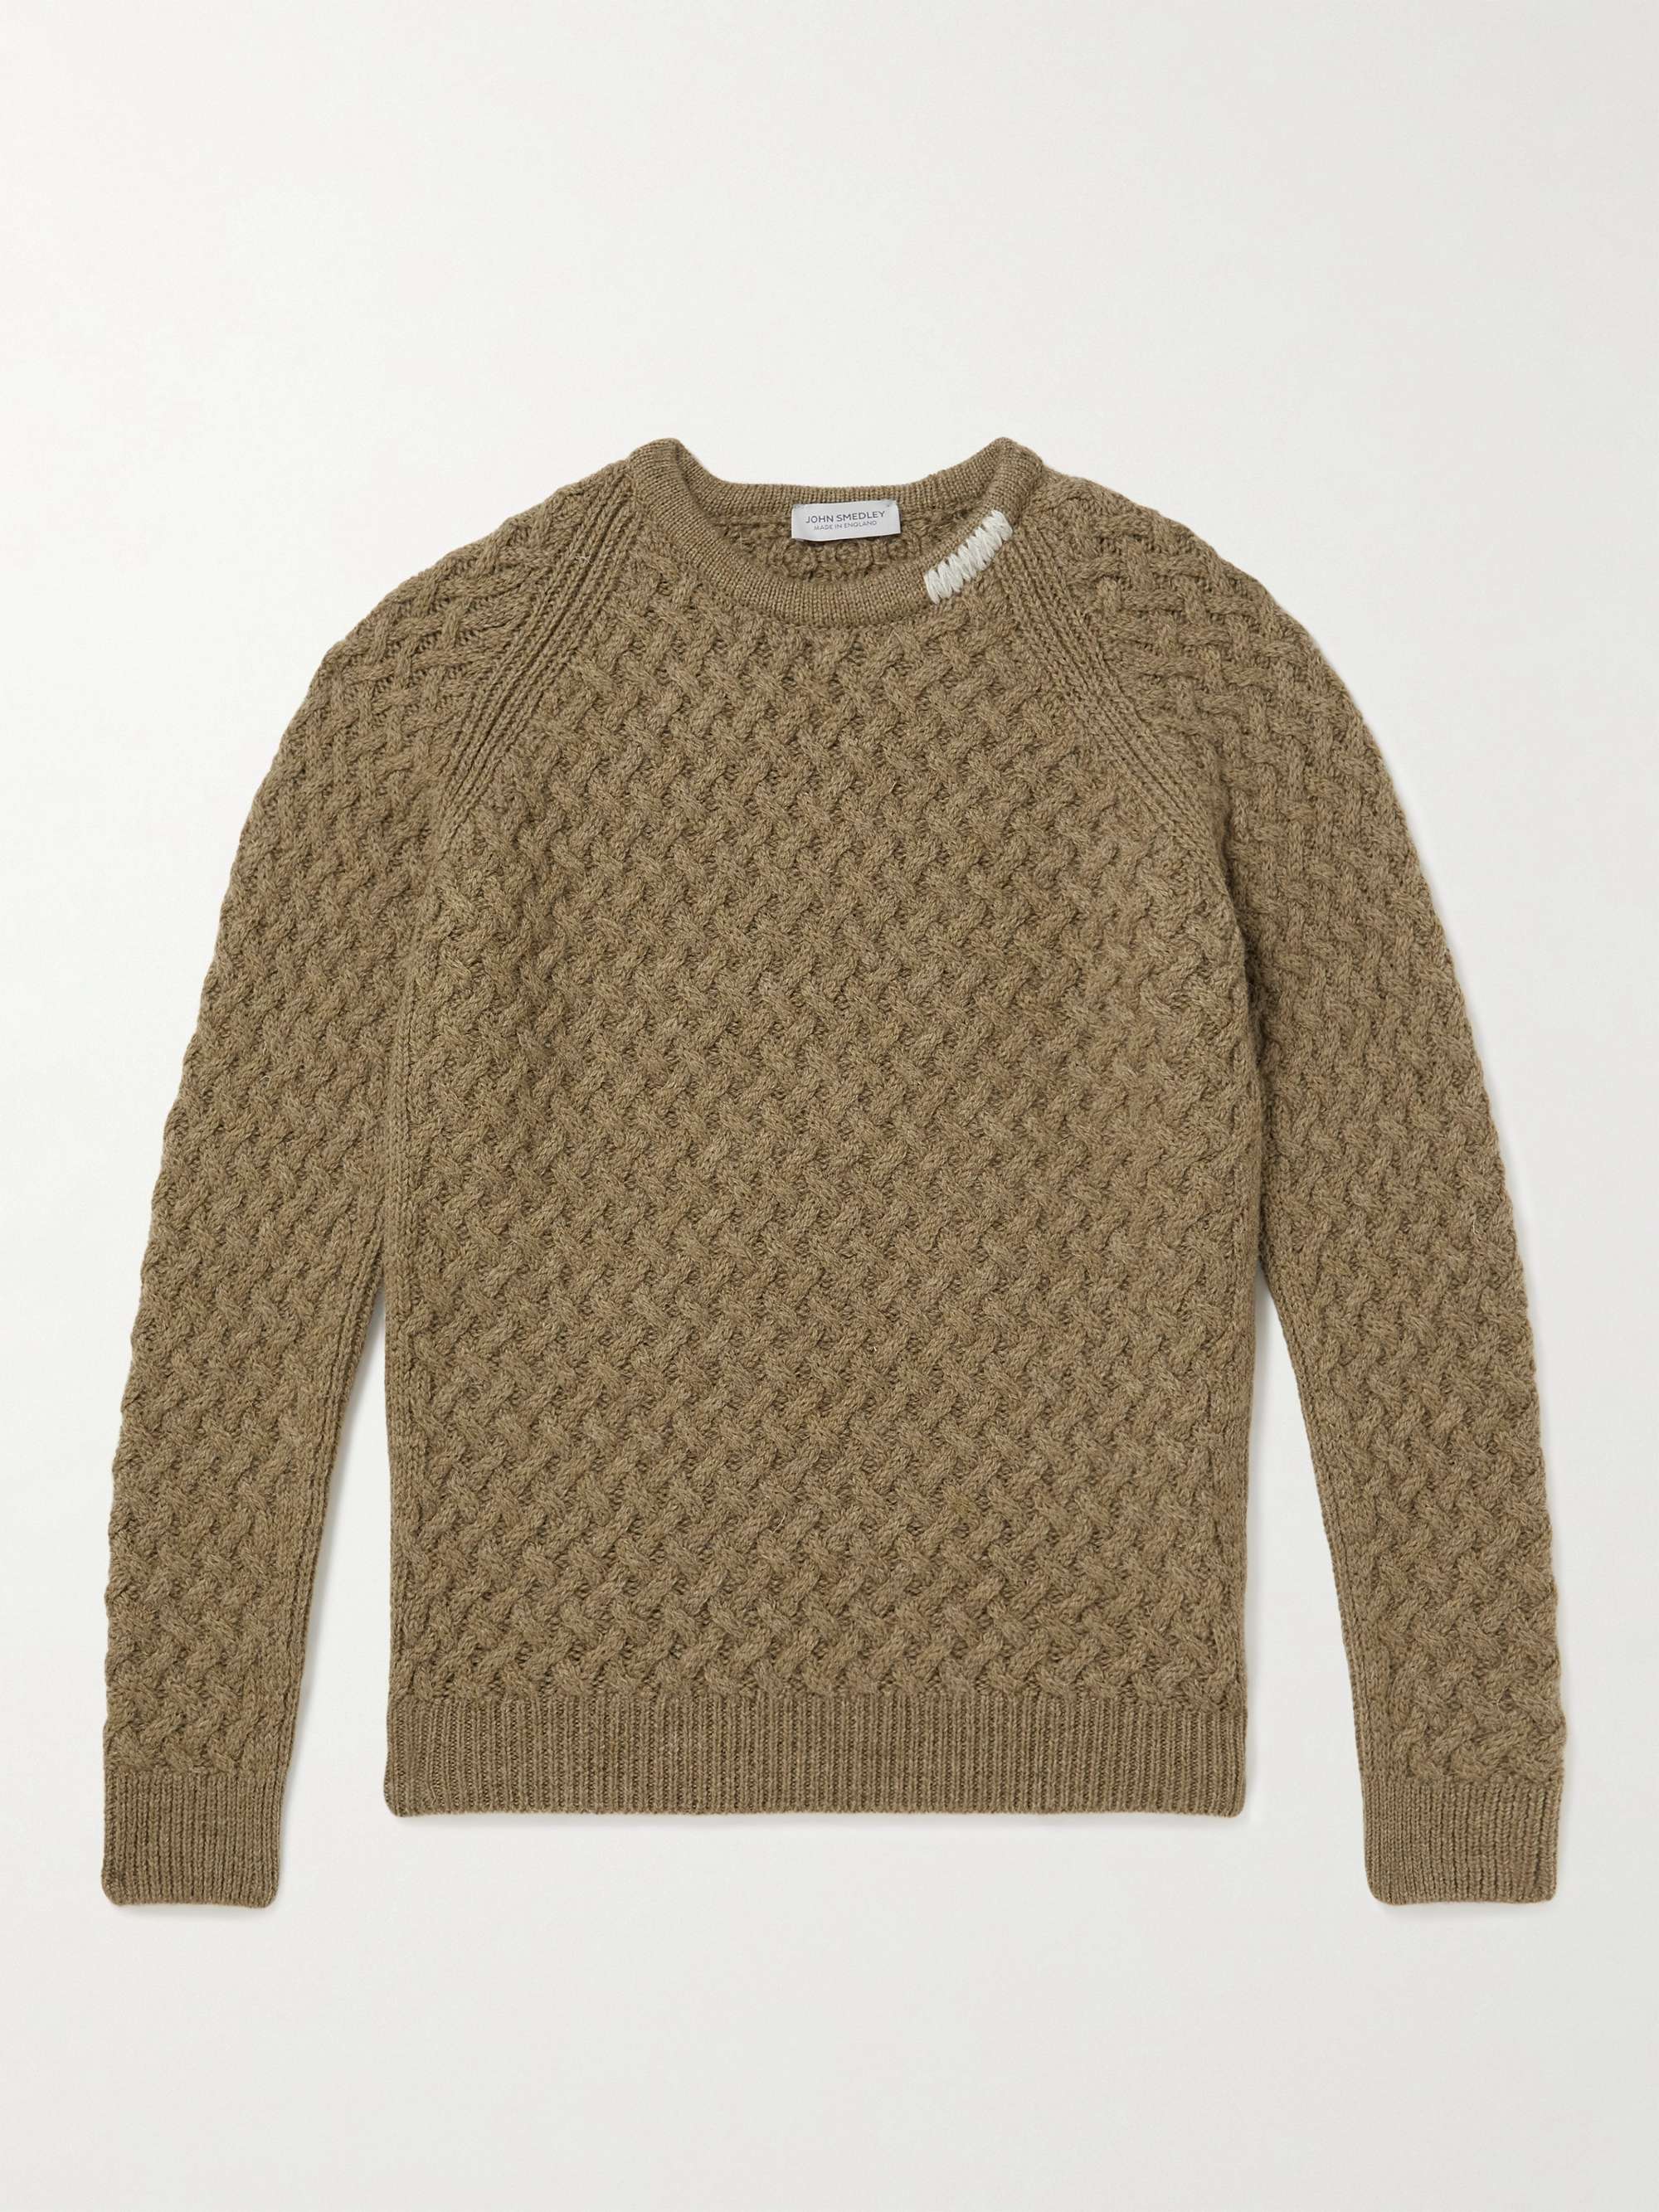 JOHN SMEDLEY Mossley Cable-Knit Wool Sweater for Men | MR PORTER